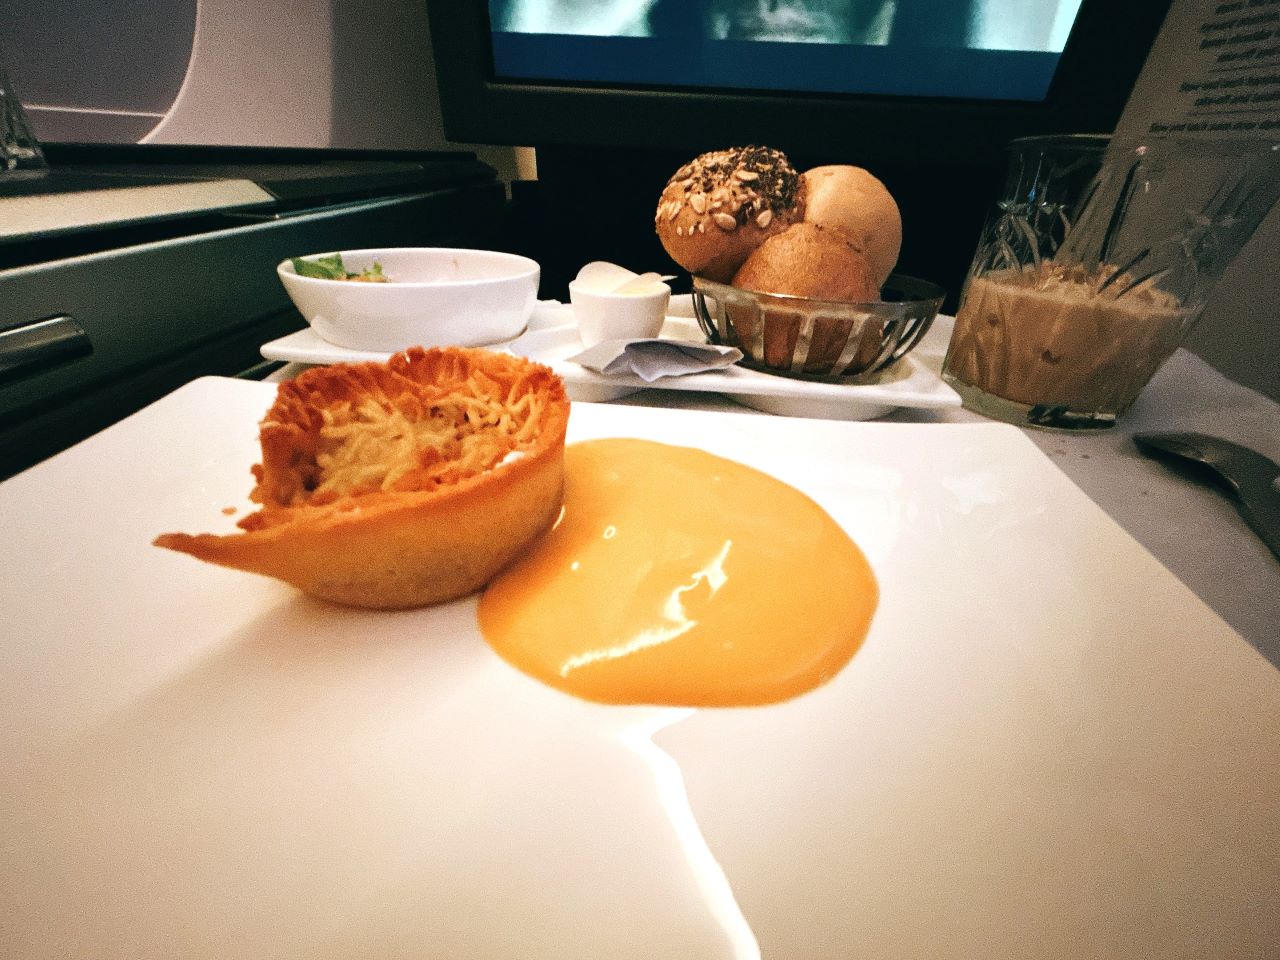 British Airways A350 - First Class Meal